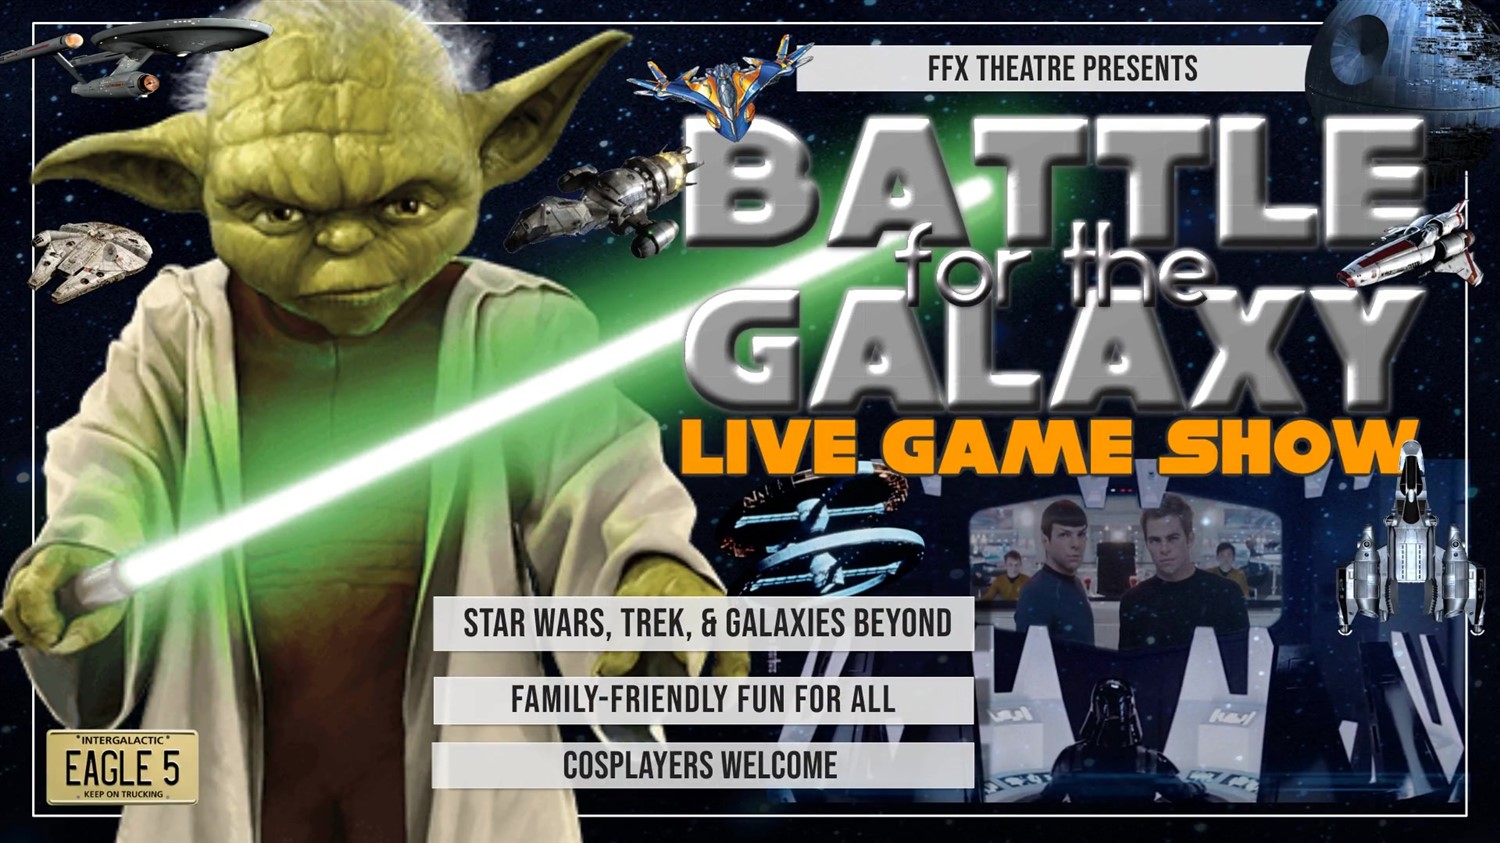 Battle for the Galaxy: LIVE SCI-FI GAME SHOW  on Jun 09, 19:00@FFX Theatre - Pick a seat, Buy tickets and Get information on Family Fun Xperience tickets.ffxshow.org